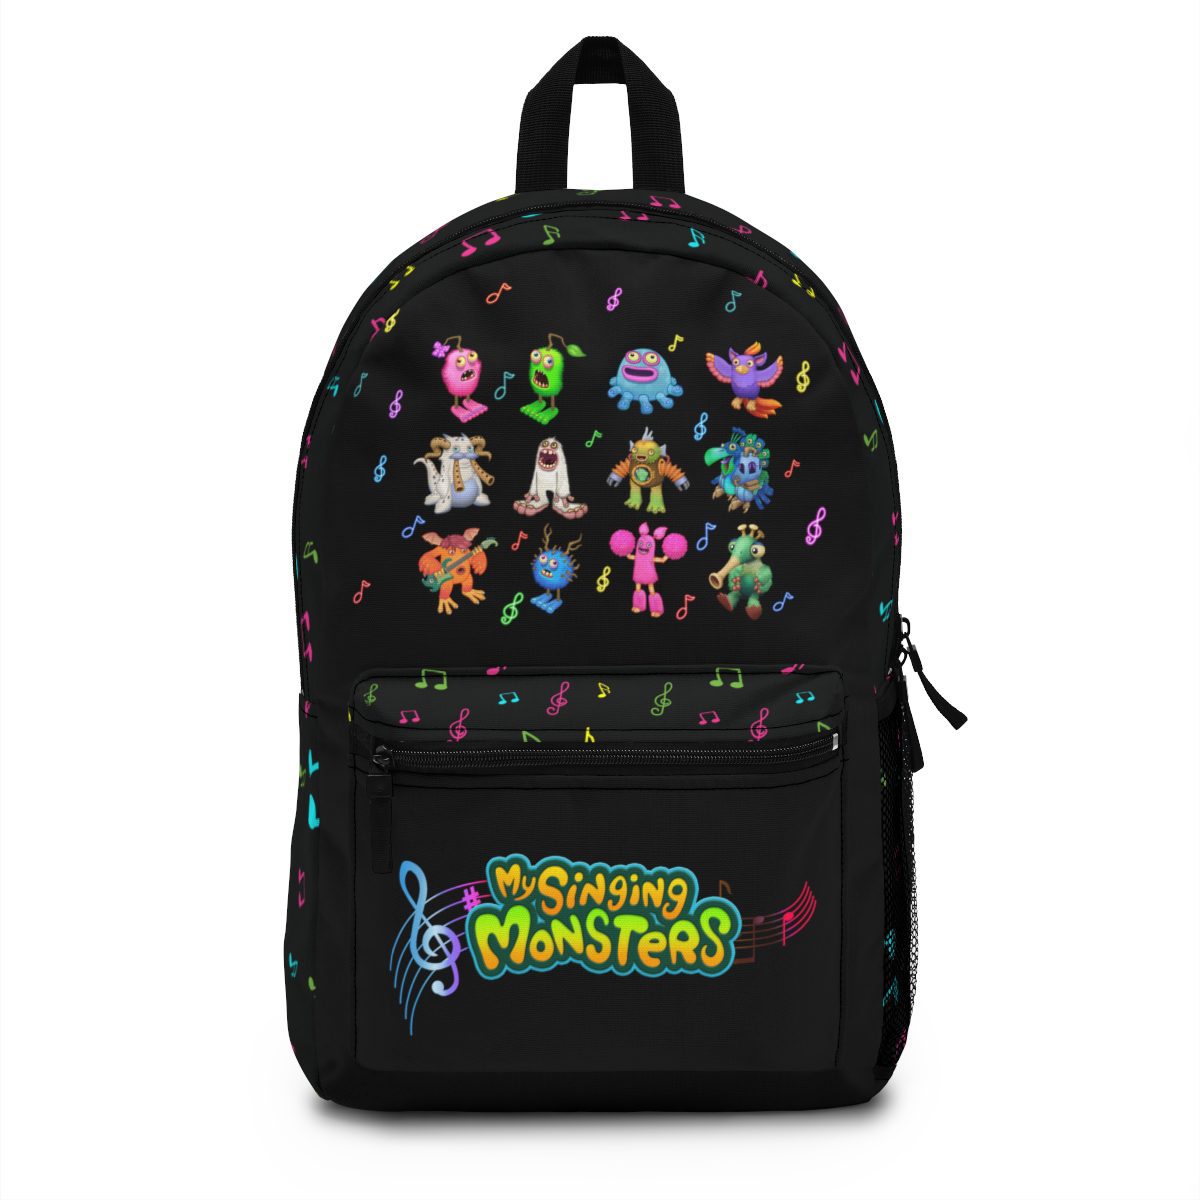 My Singing Monsters Backpack Funny and Colorful Characters Black Background Cool Kiddo 10